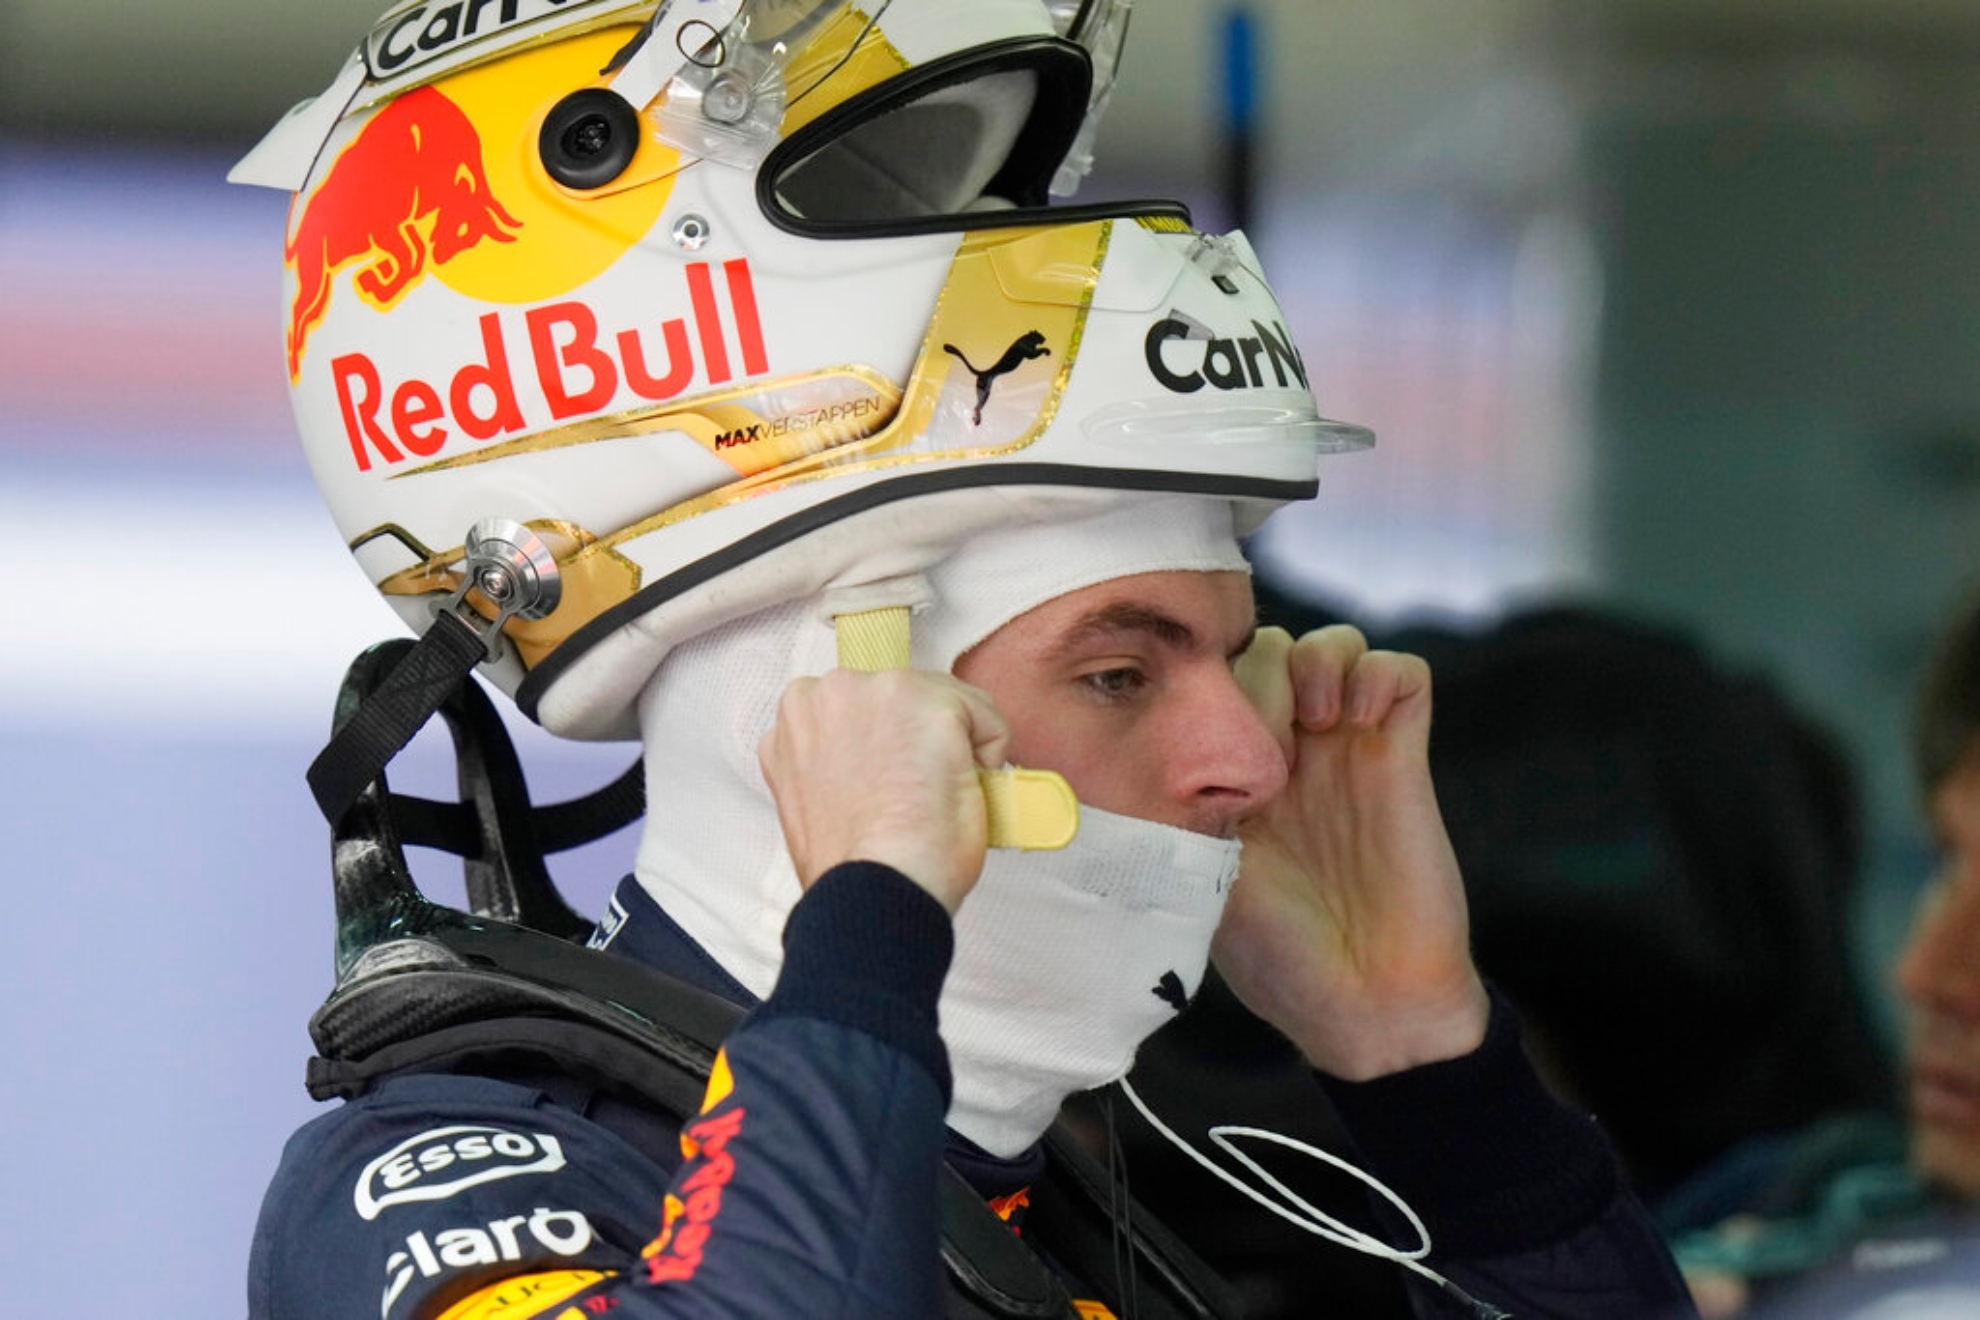 Verstappen picks up where he left off and claims pole for F1